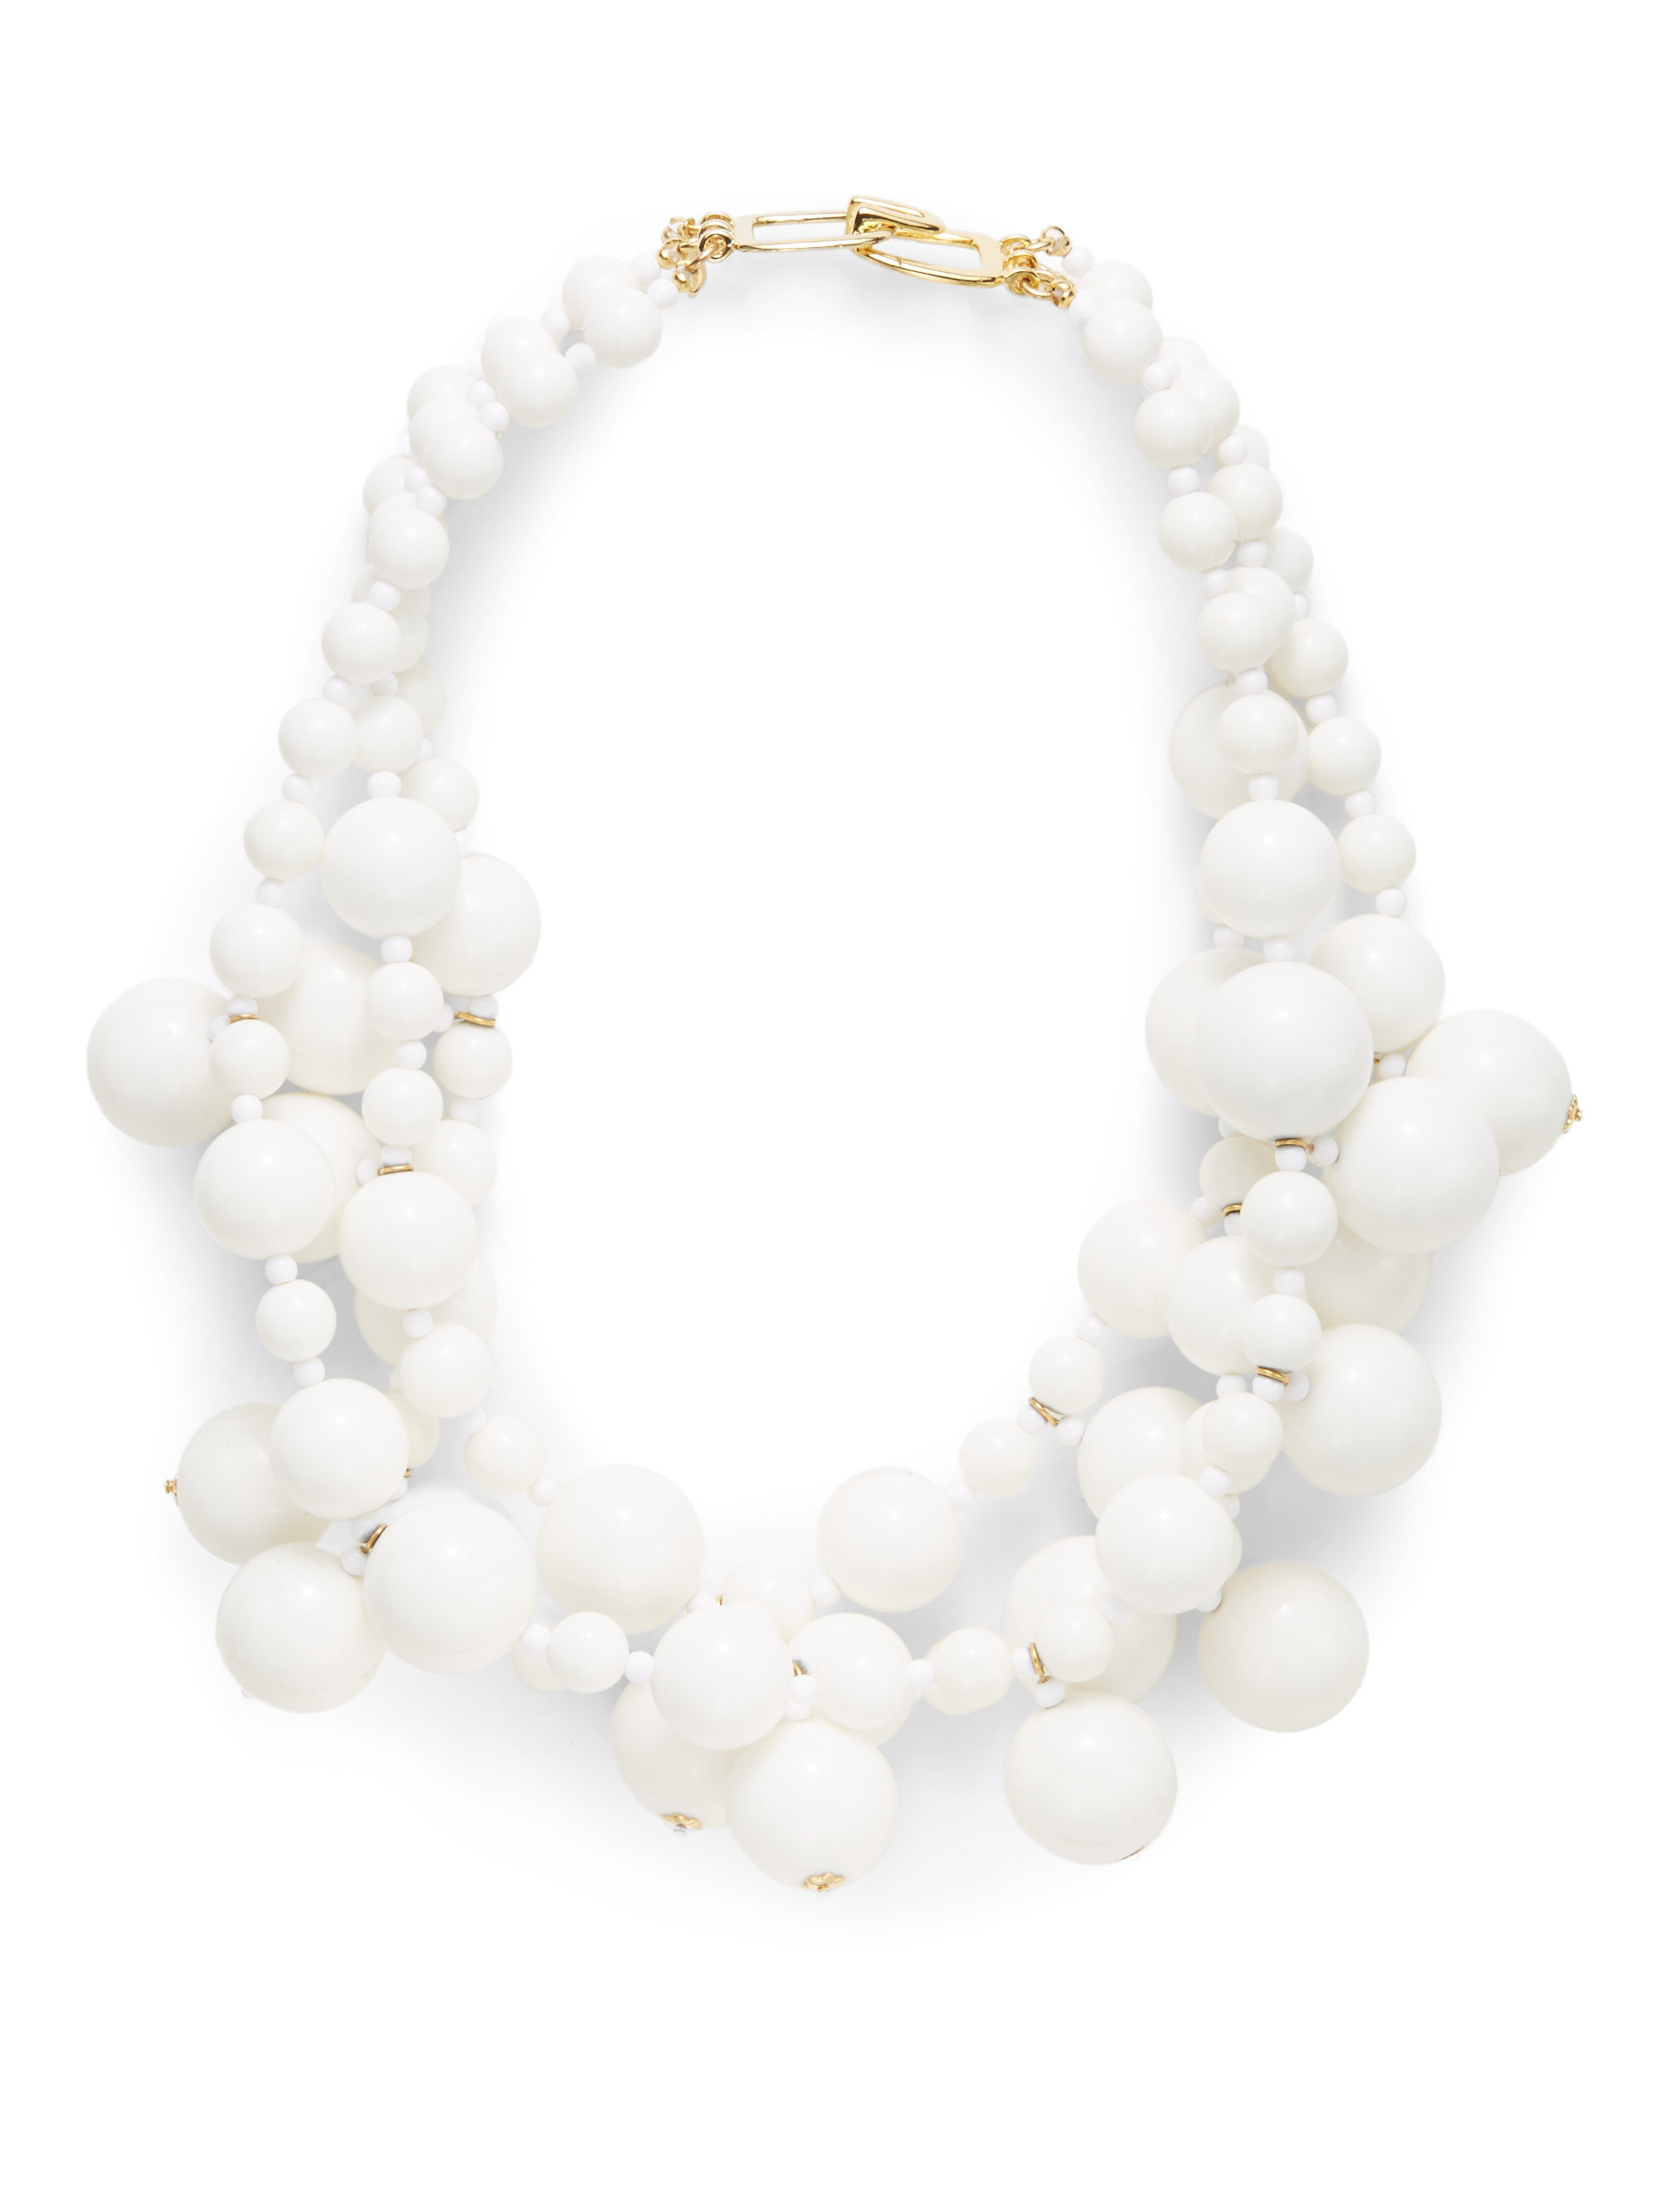 Lyst - Kenneth Jay Lane Beaded Cluster Multi-row Necklace in White